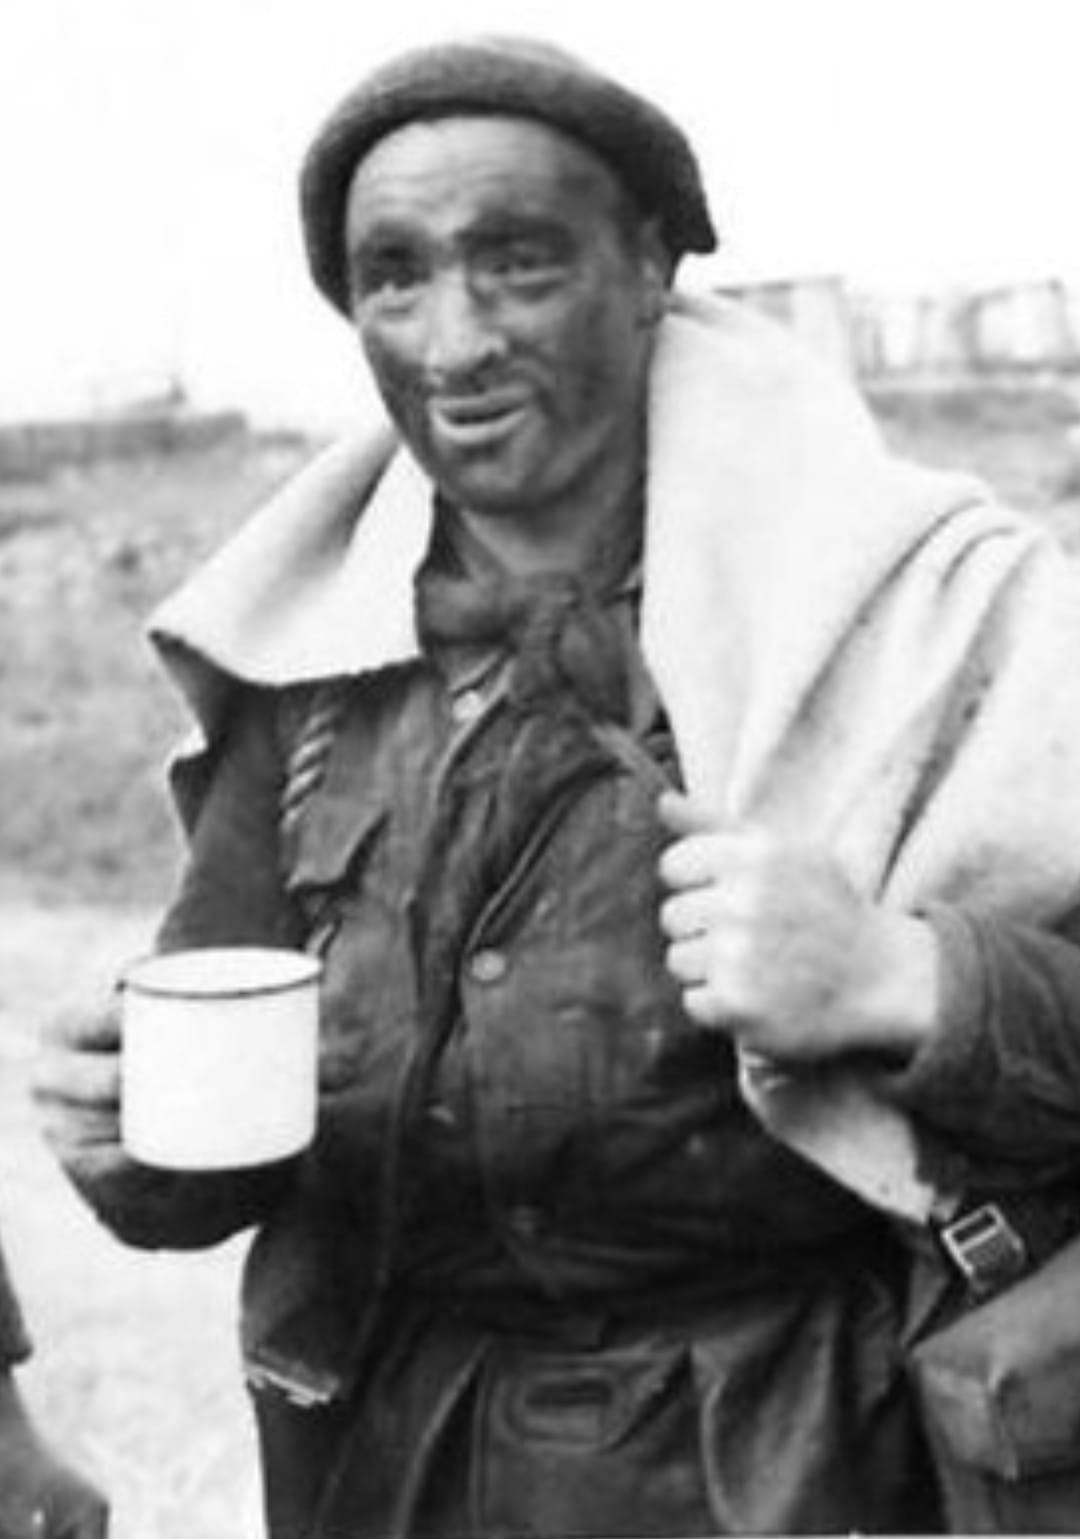 <p class='eng'>Pte. W. Balfour, with his face still blackened, drinks his tea.<br />Taken by Sgt. Mott. 30.12.43. © IWM NA 10446</p>